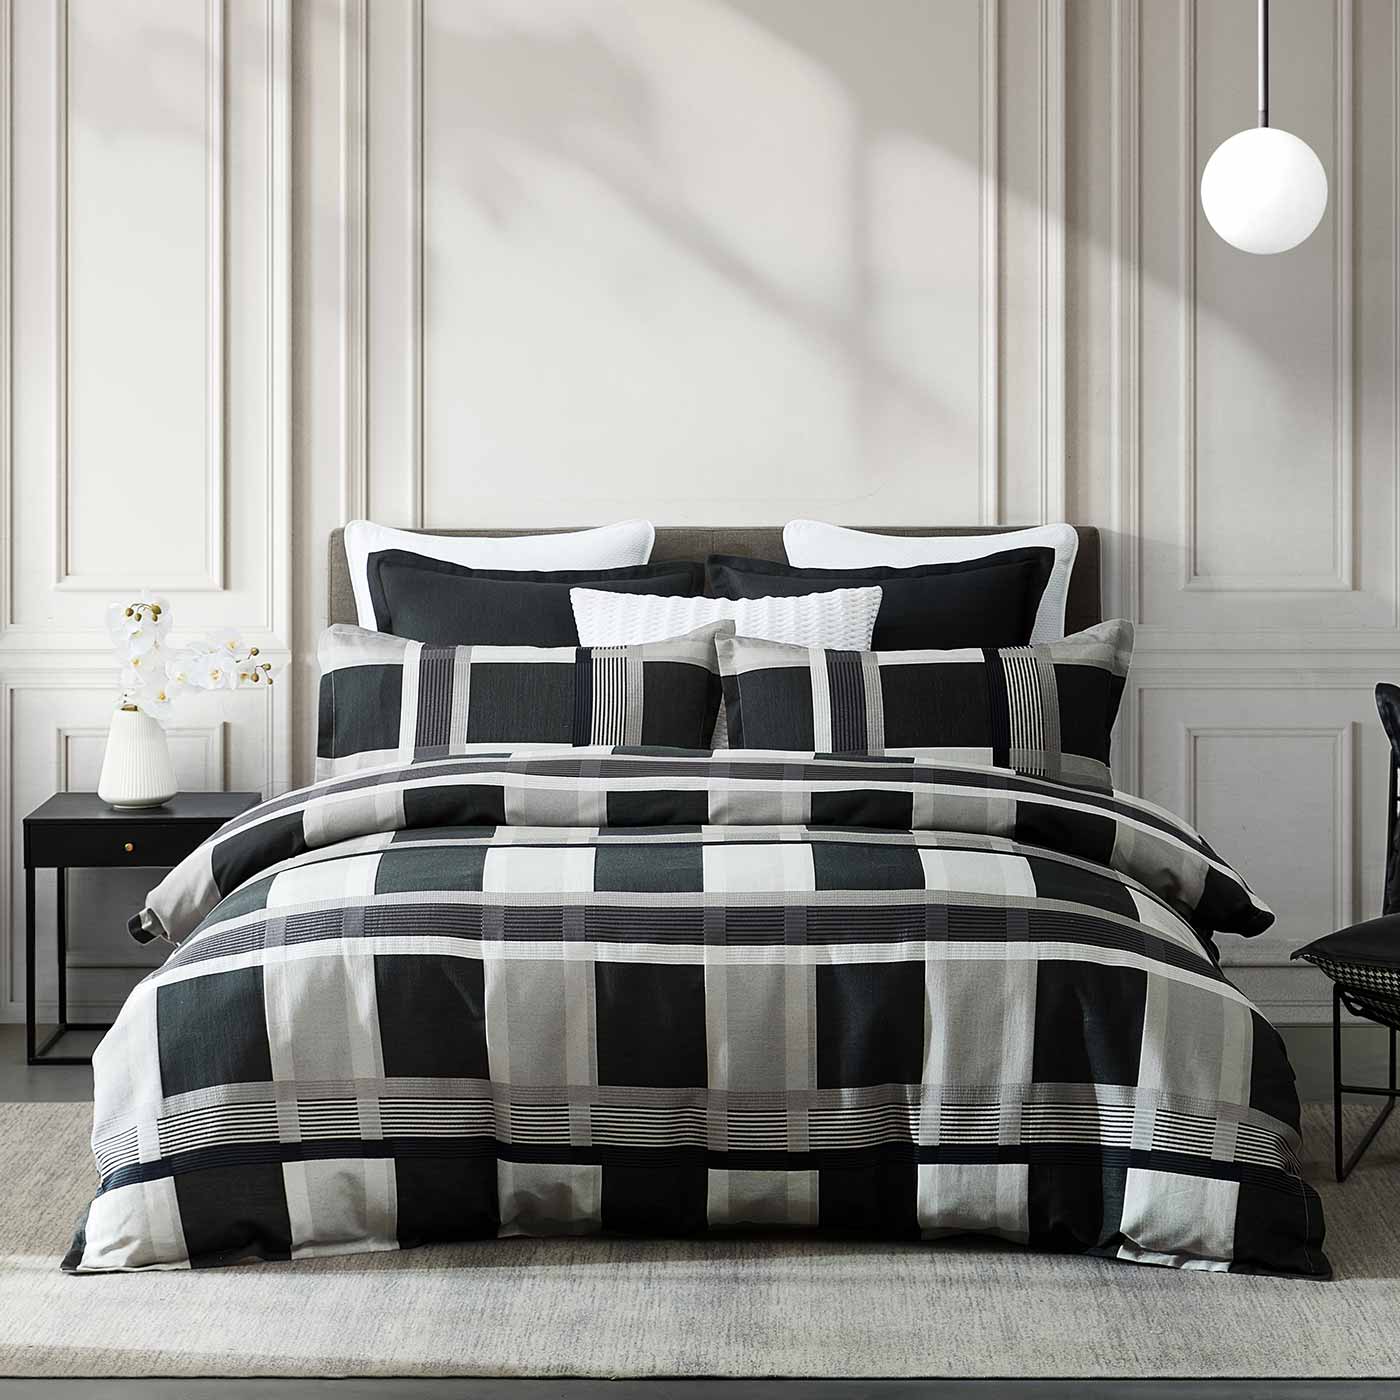 Conrad Silver imbues classic checks with a new attitude. The daring scale and urban palette seamlessly integrate into the contemporary home. Conrad’s European pillowcases feature a soft velvet reverse in silver. Simply turn them around to create a different look.